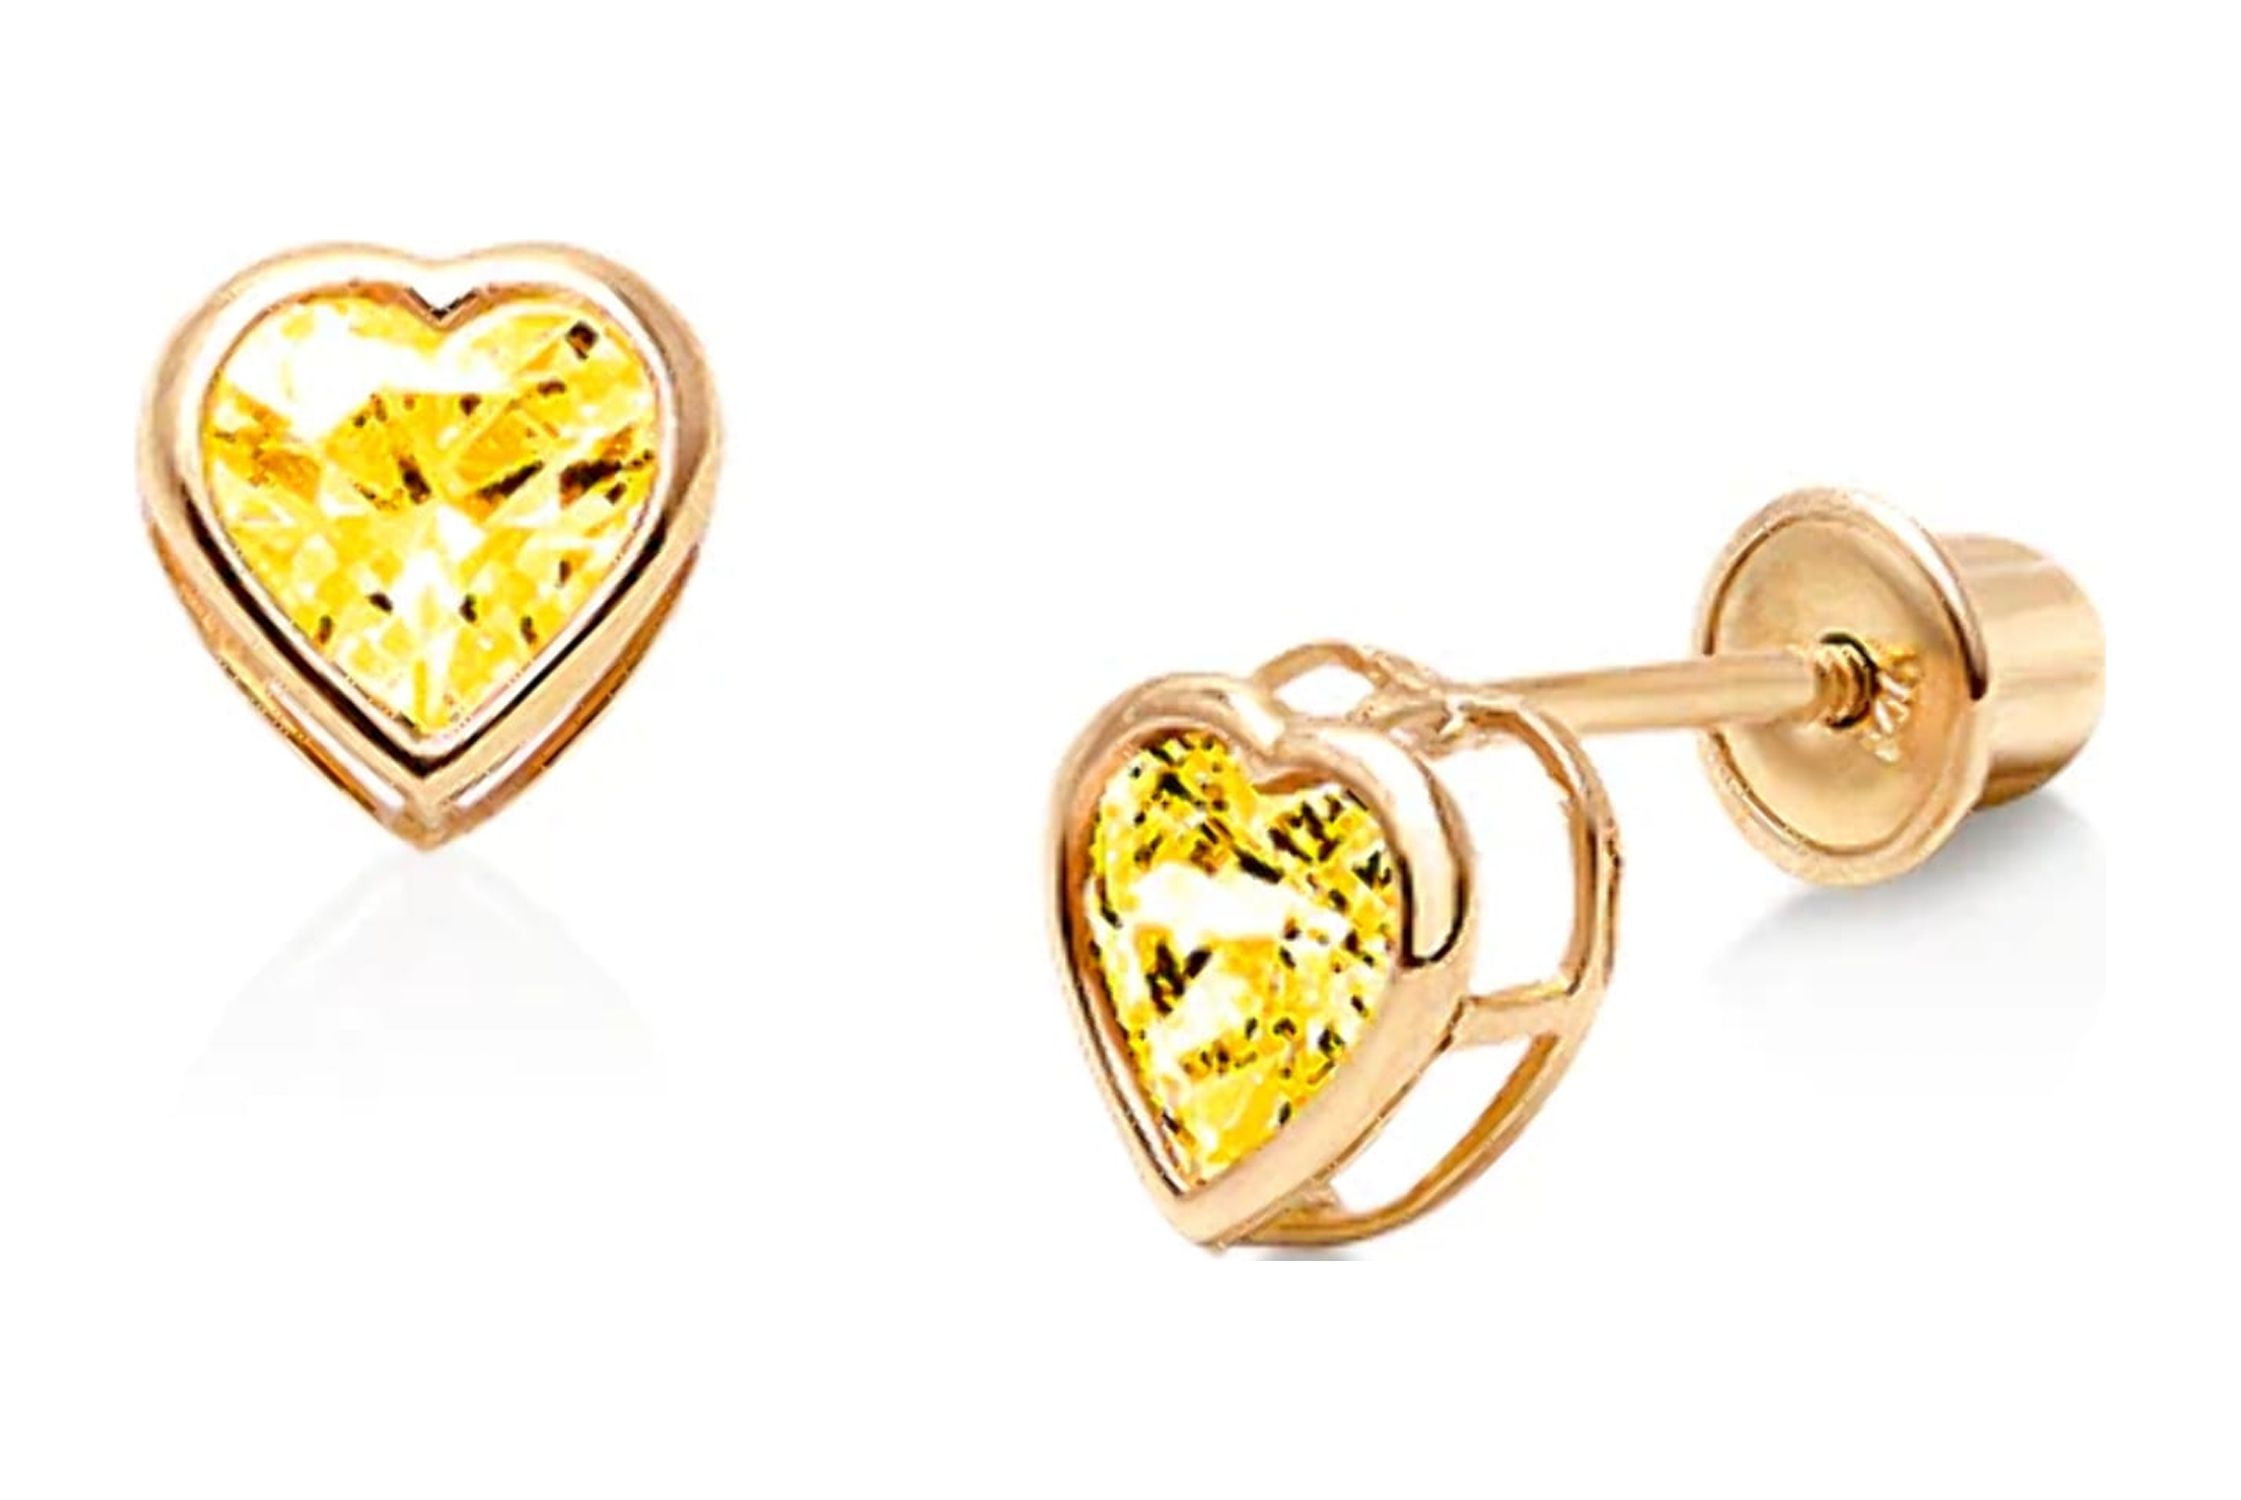 14k Yellow Gold 4mm Bezel Set Heart Cubic Zirconia Screw Back Earrings for  Baby Girls, Toddlers and Young Girls - Cute Heart Earring Studs for